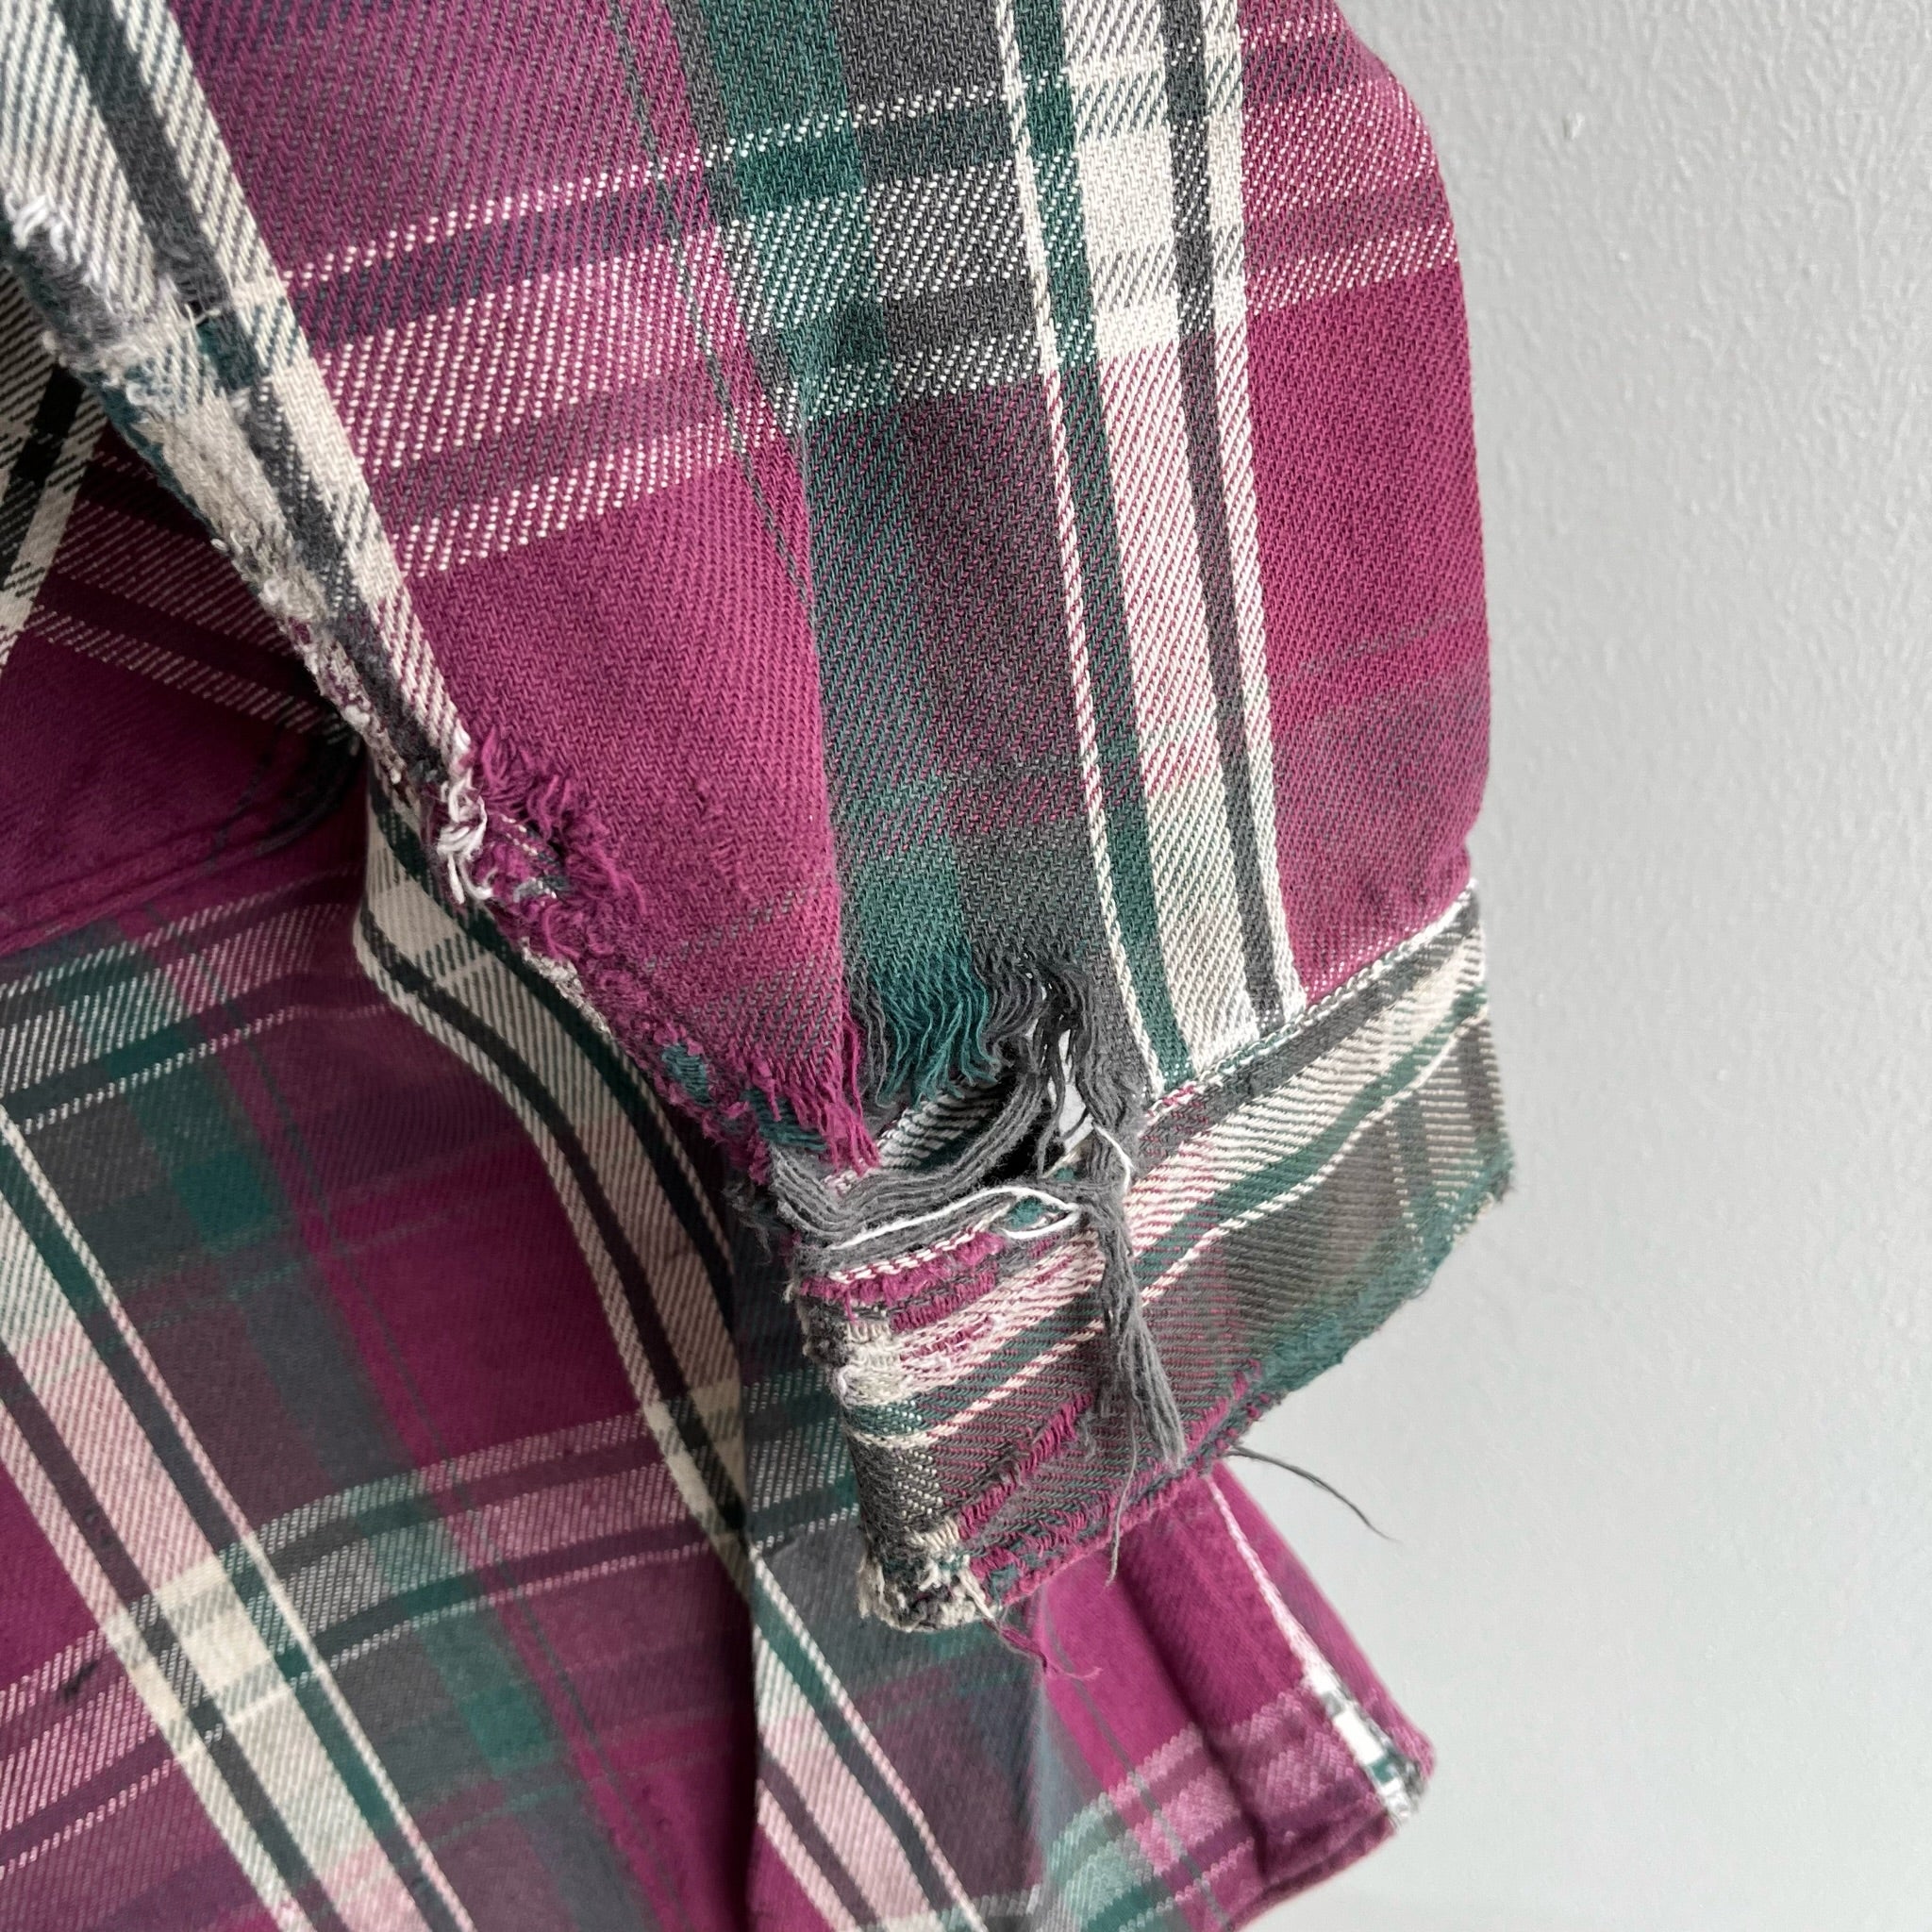 1990s BEAT UP Cotton Flannel by St. John's Bay